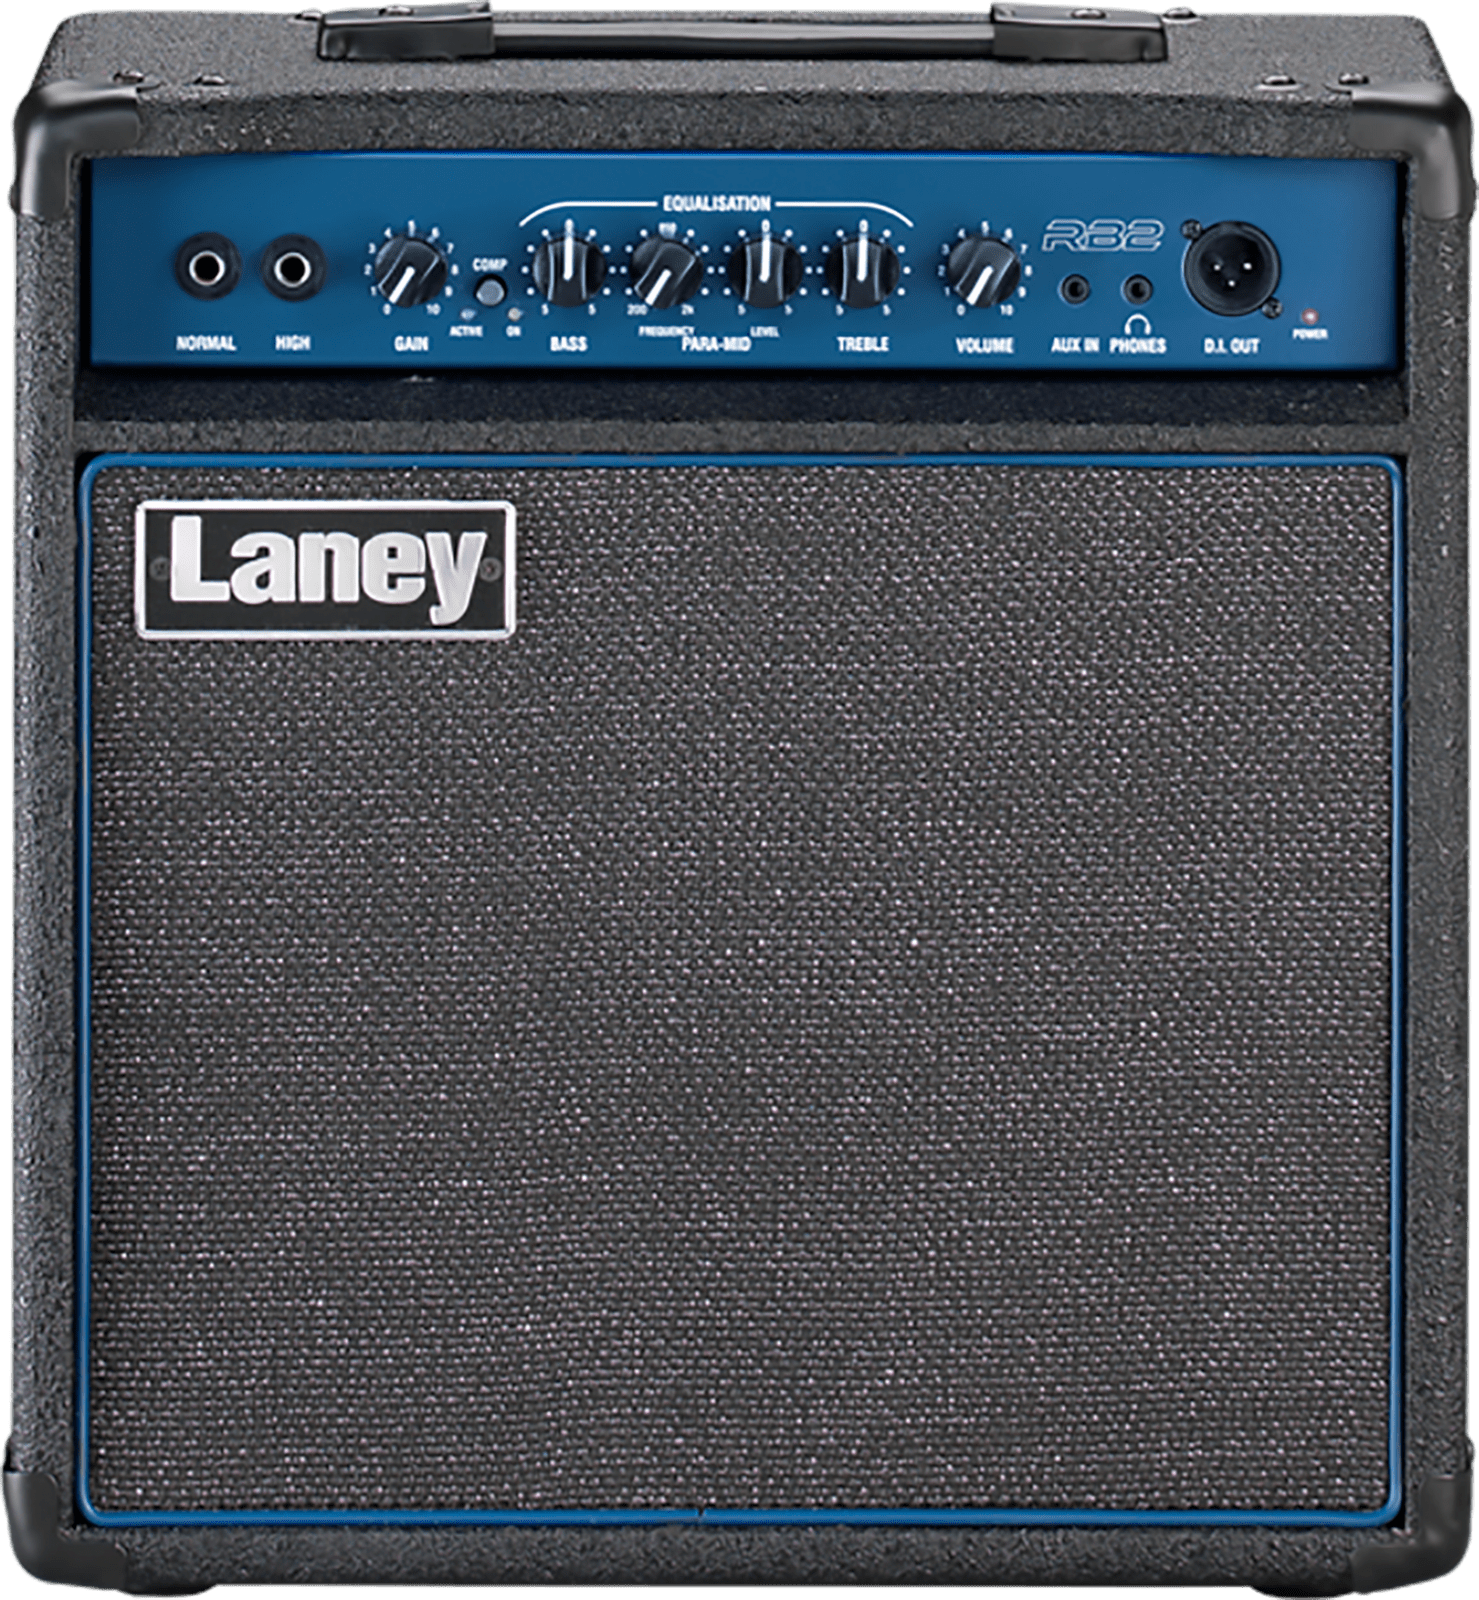 Laney UK RB2, Solid Bass Amplifiers, 30 Watts with 10” Driver and 3-Band EQ.